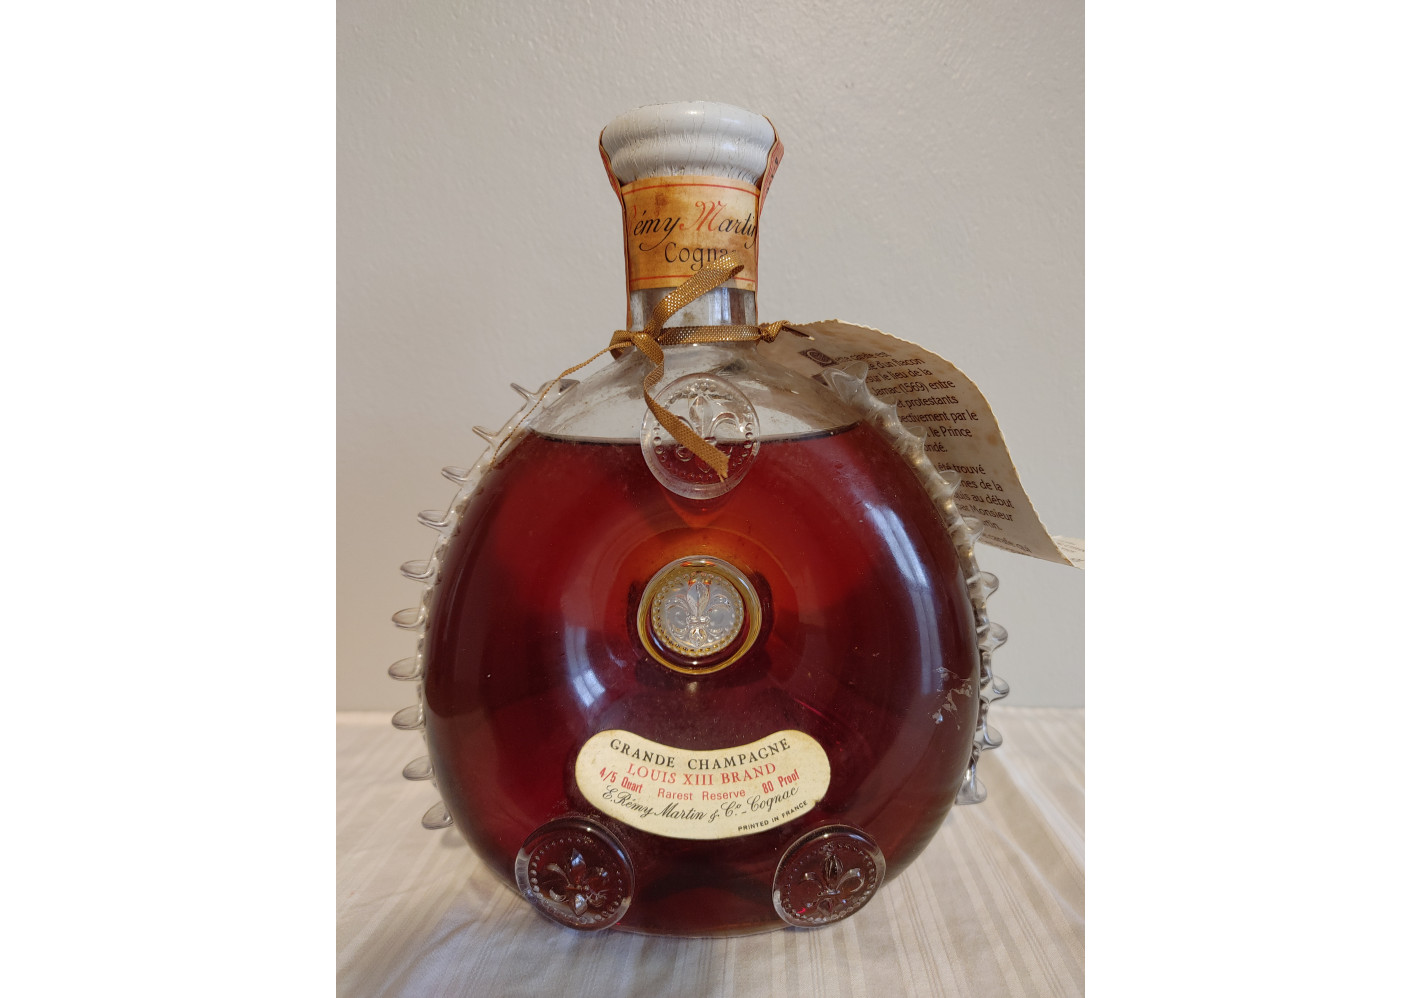 Remy Martin Louis XIII Cognac for sale - Other spirits - Whisky and More